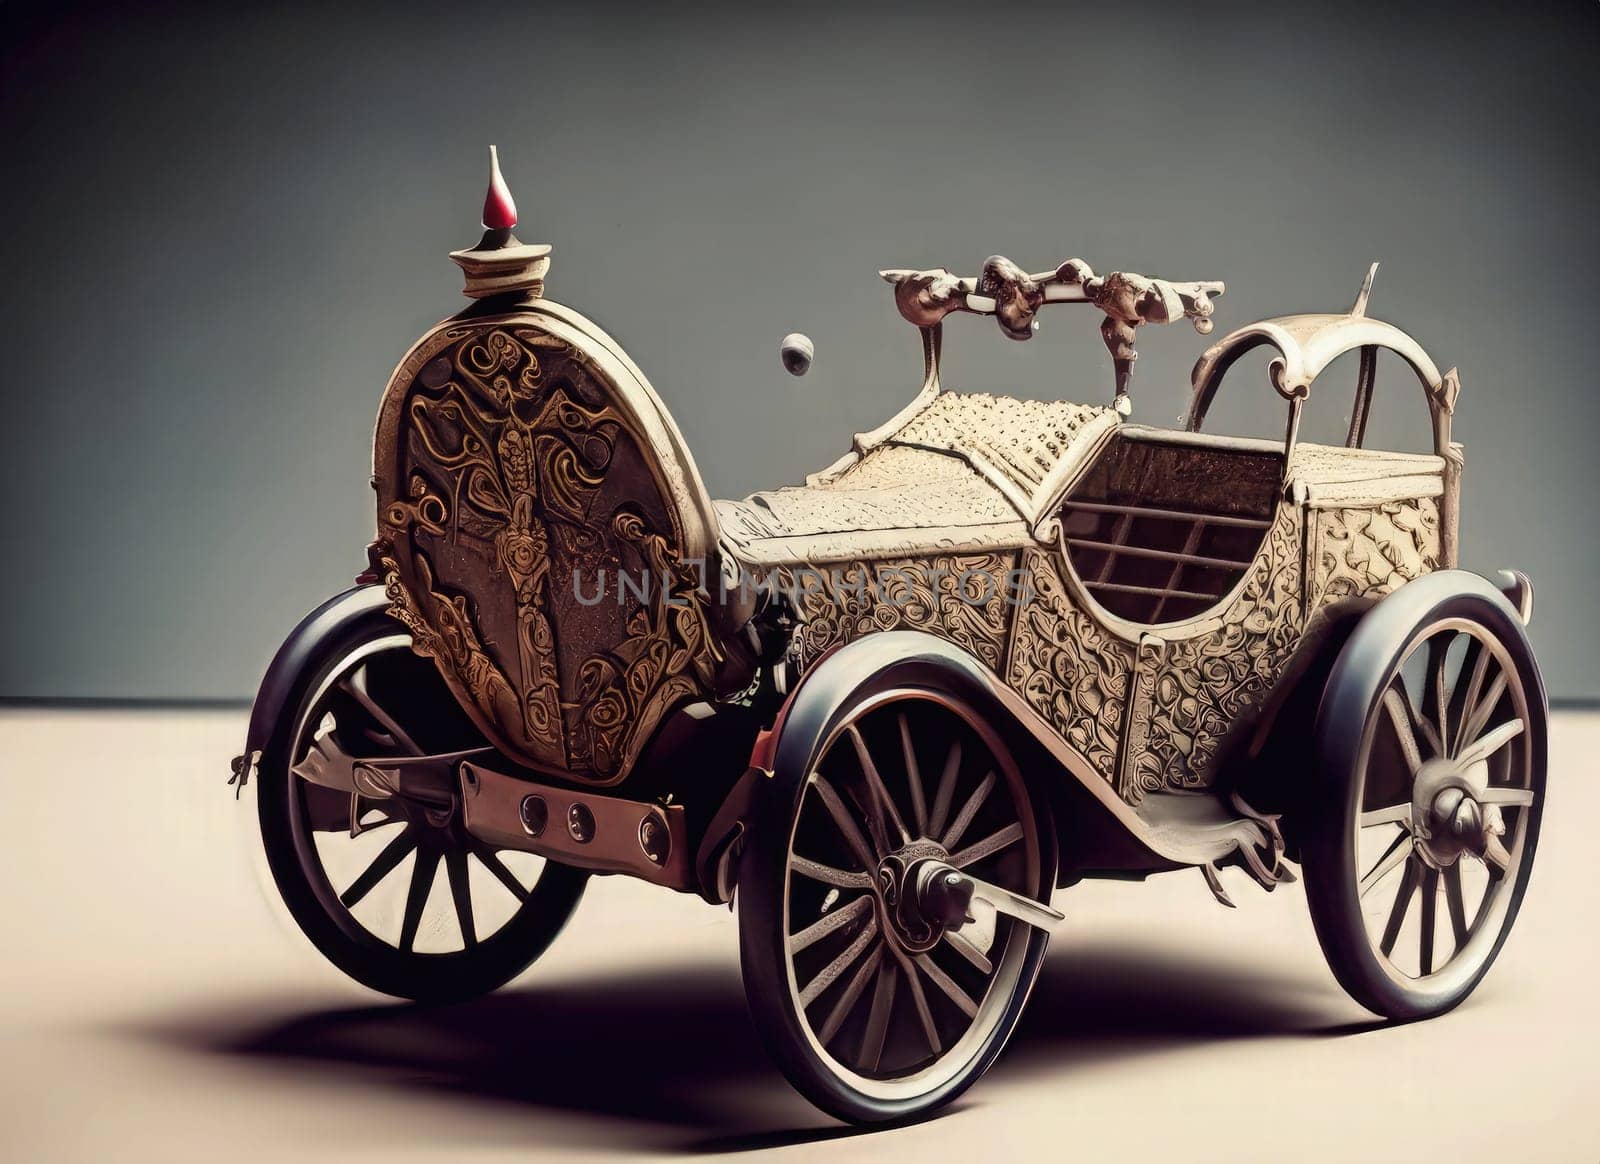 Vintage car in the style of the 19th century by Waseem-Creations